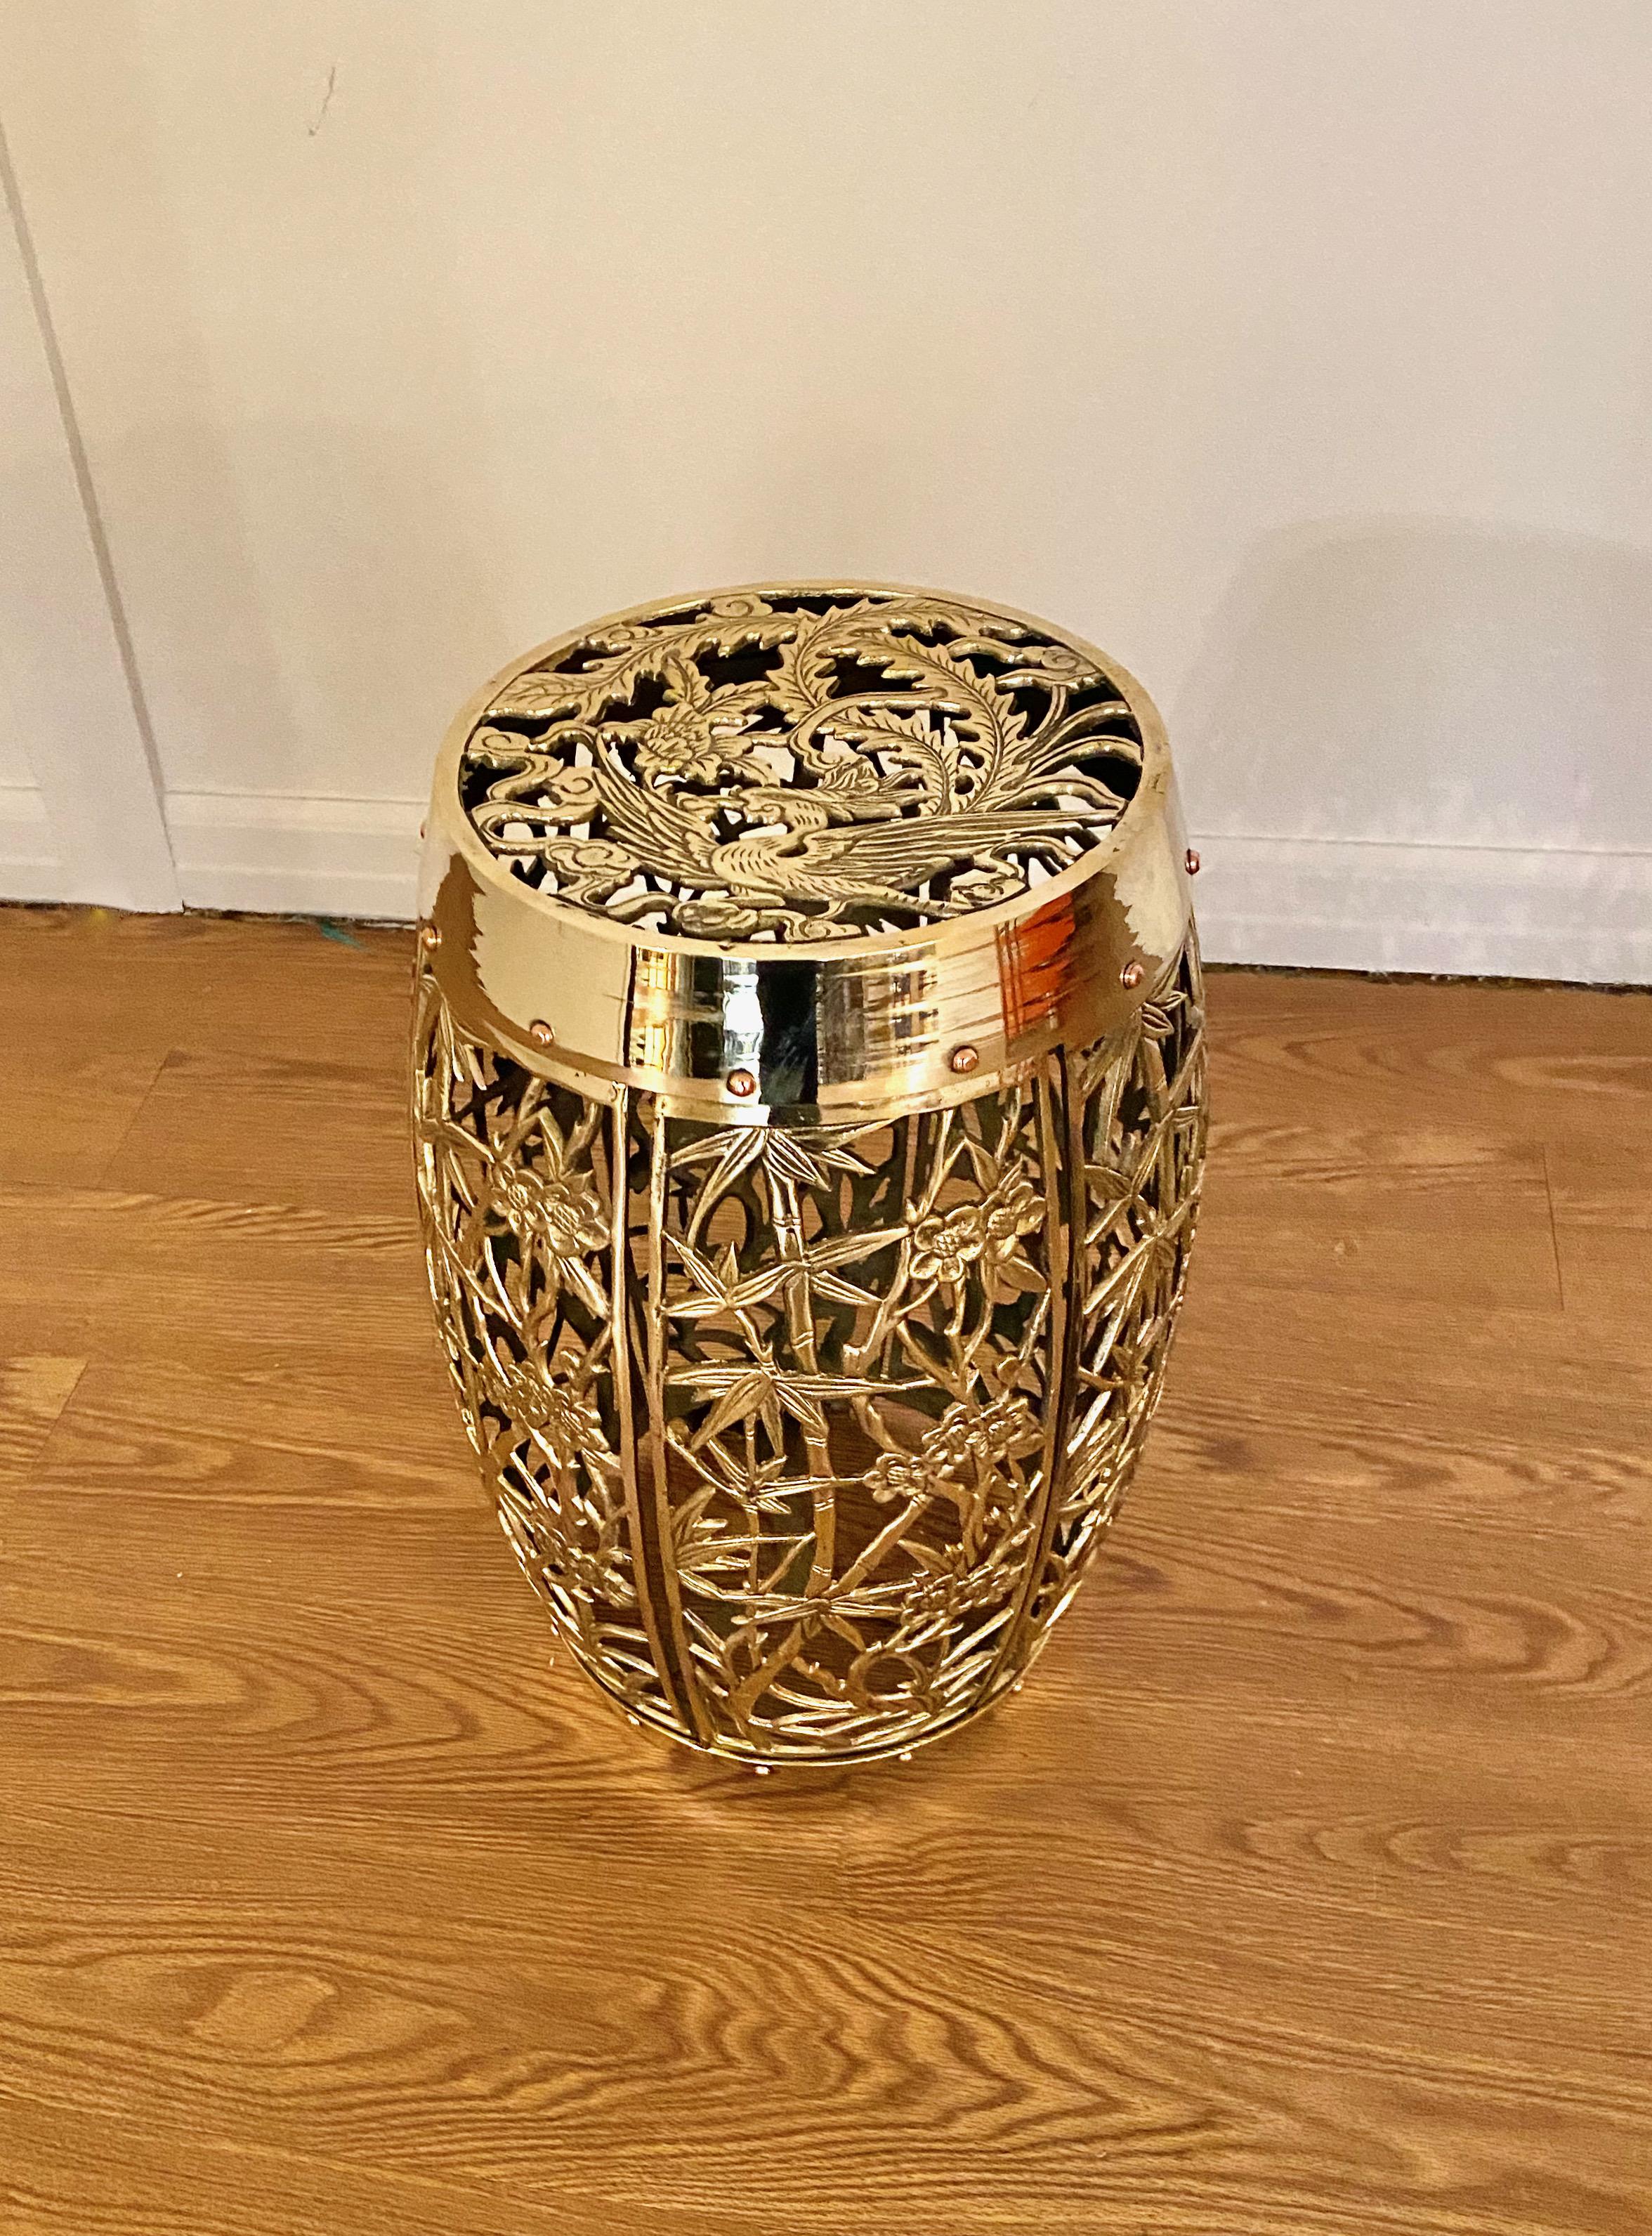 This is a classic Mastercraft brass Chinoiserie-style garden stool in the Phoenix & Bamboo pattern. The stool is in excellent condition having been newly polished.